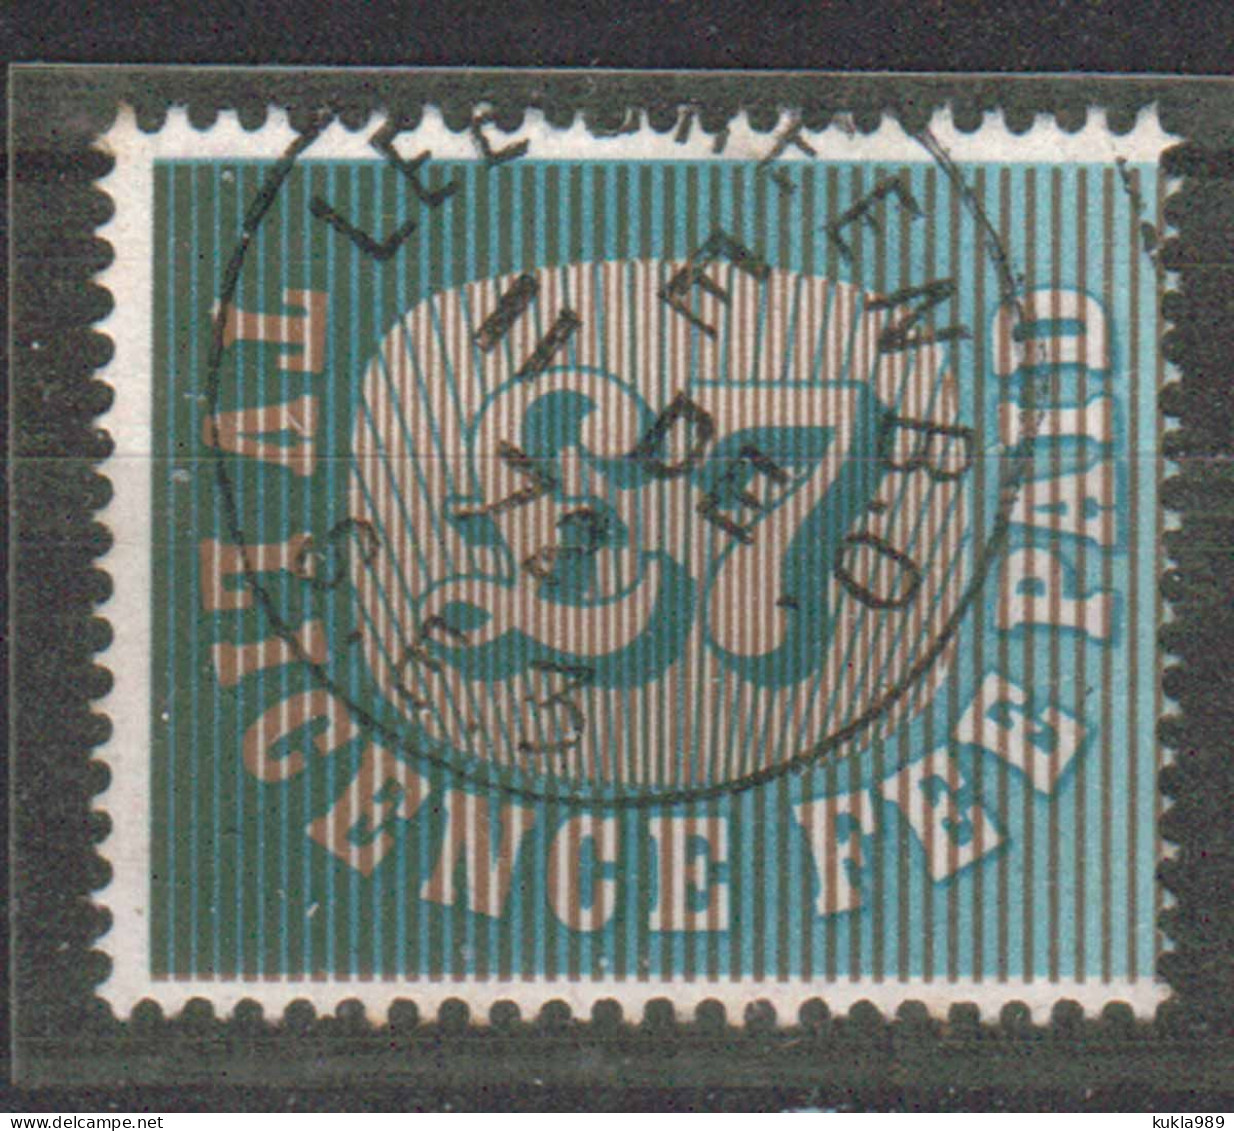 GB STAMP REVENUE TAX TV LICENCE FEE PAID, 1970s, USED - Fiscaux